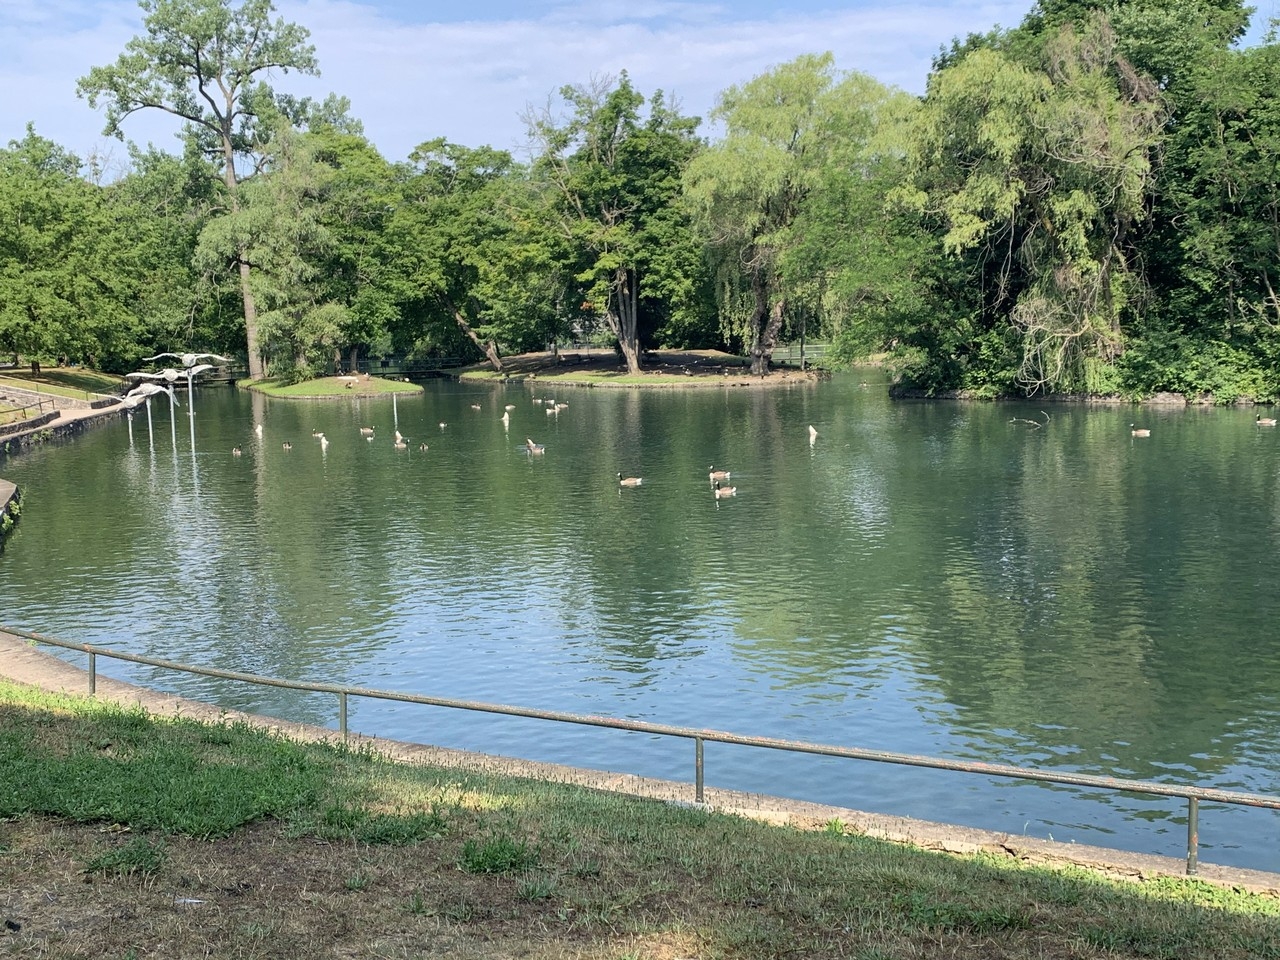 https://res.cloudinary.com/see-sight-tours/image/upload/v1594650565/geese-dufferin-island.jpg